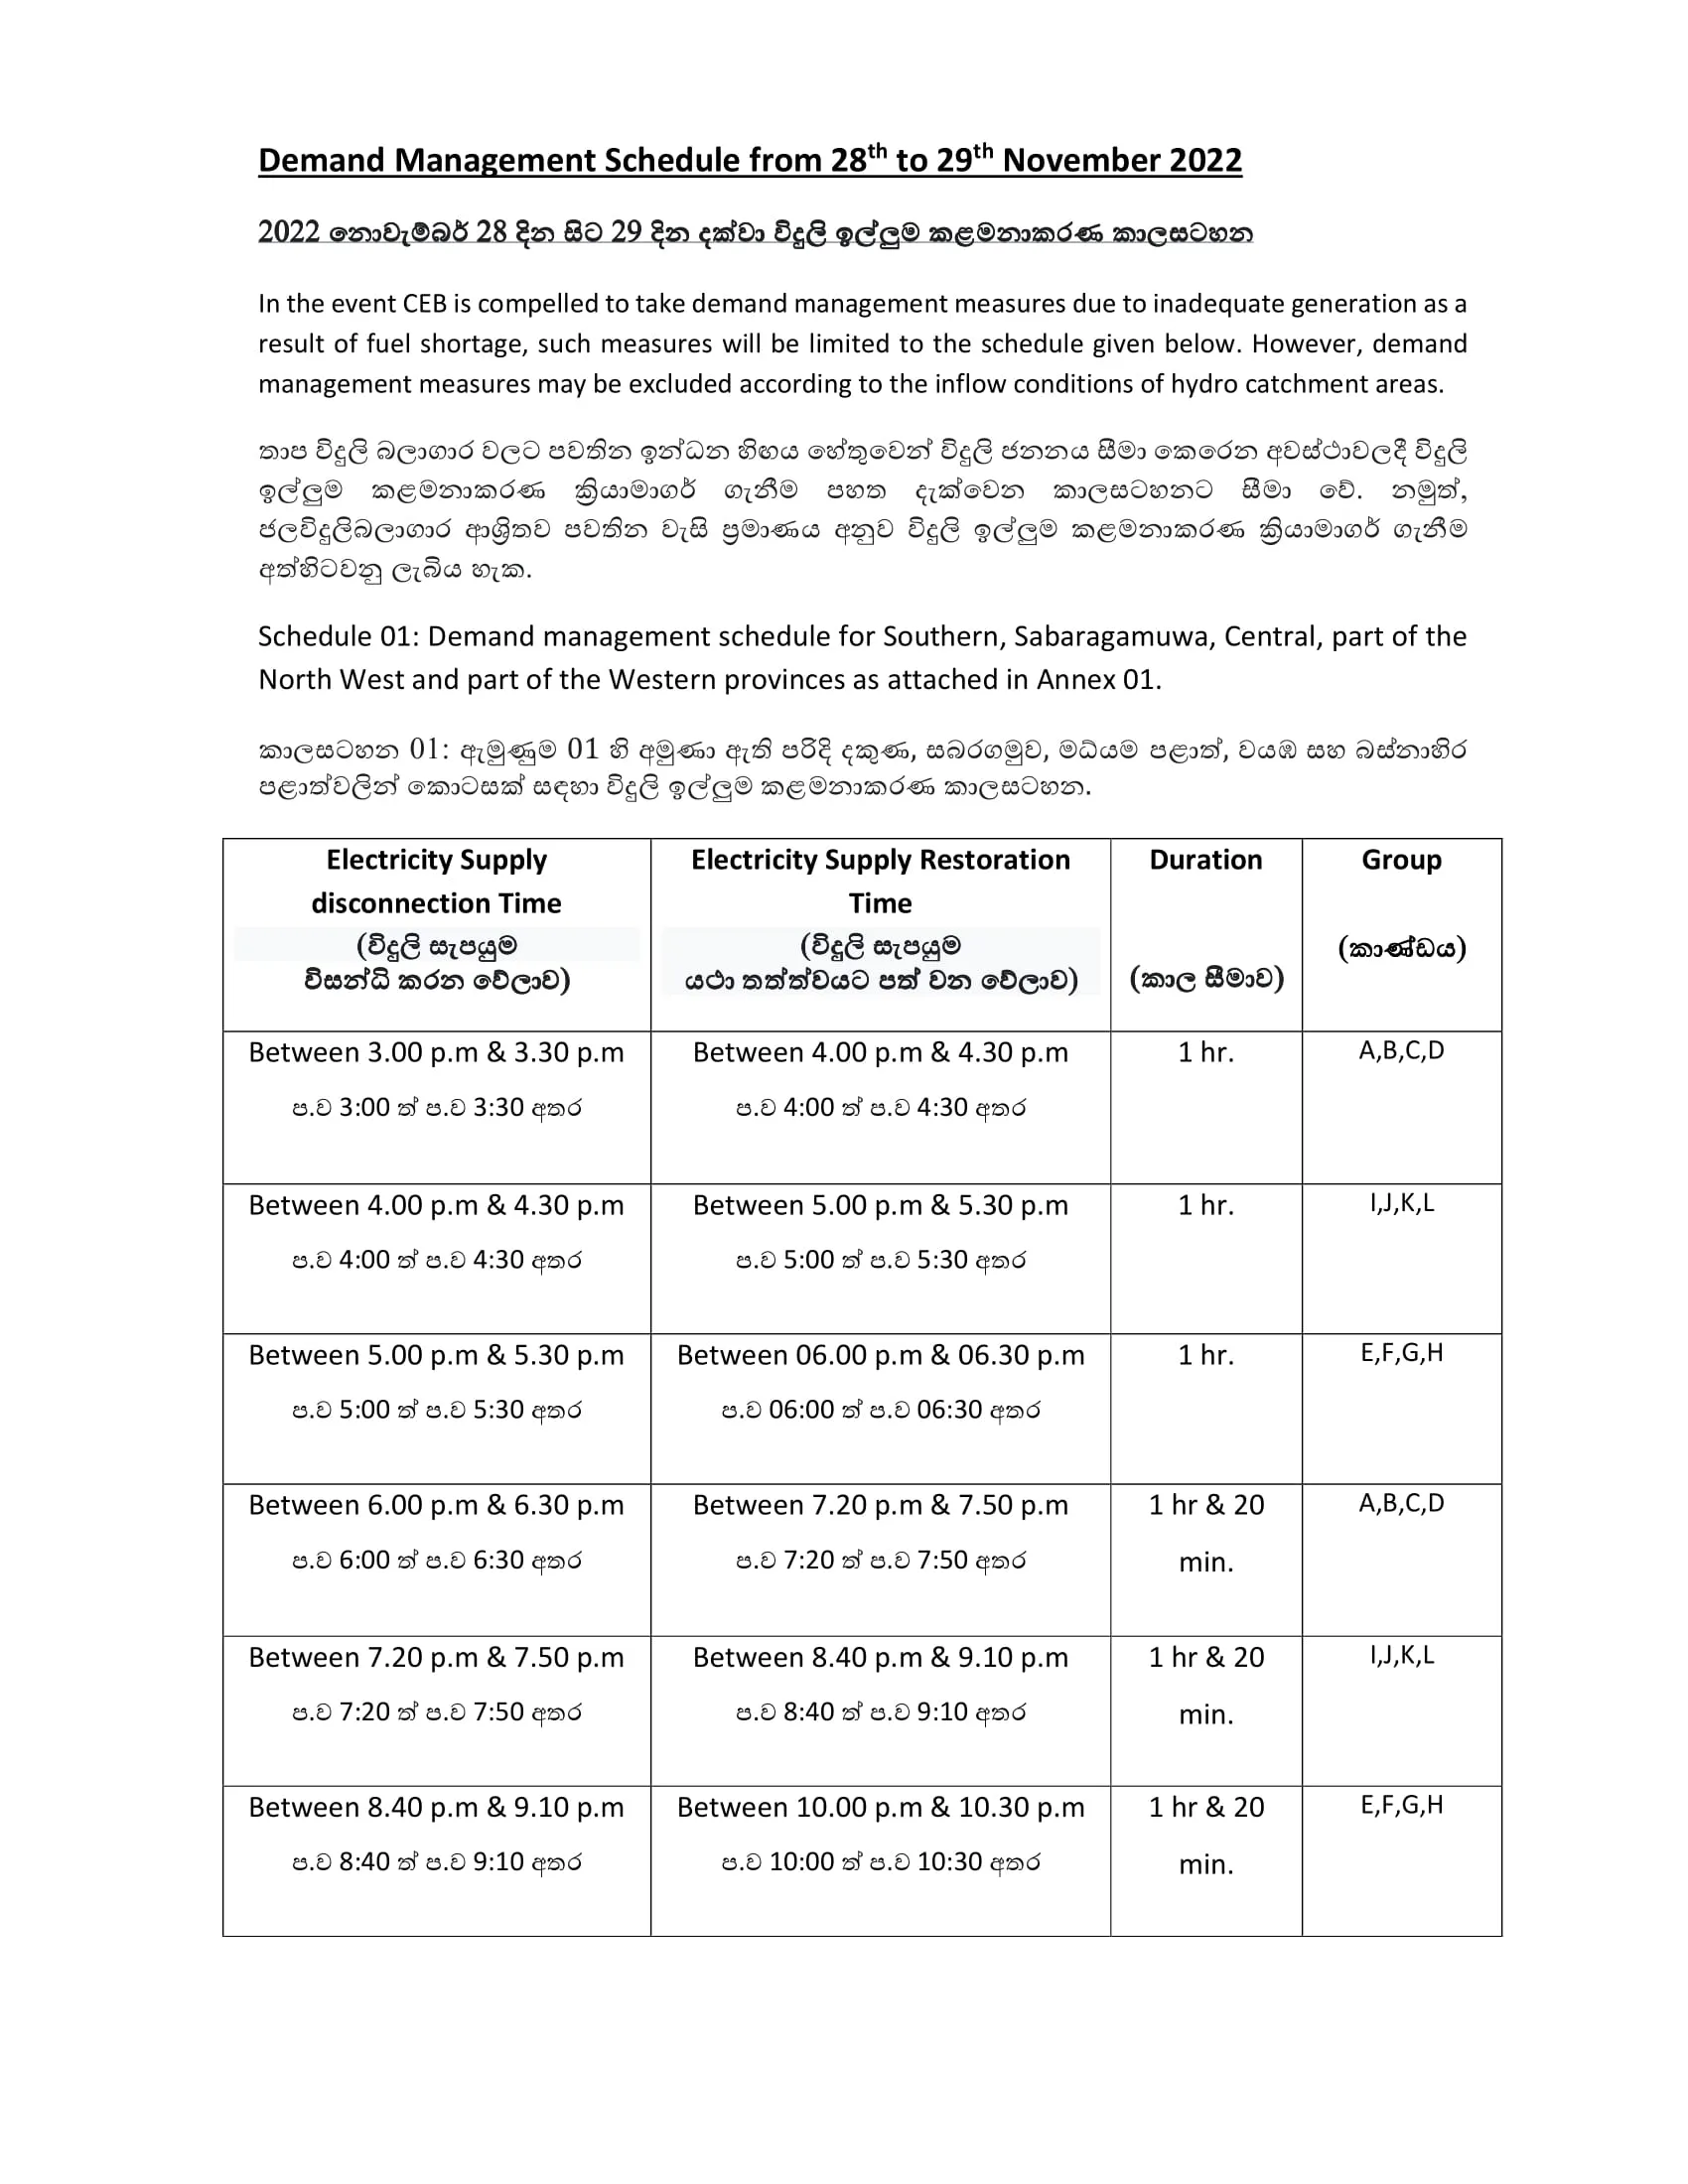 Demand Management Schedule from 28 to 29 November 2022 1